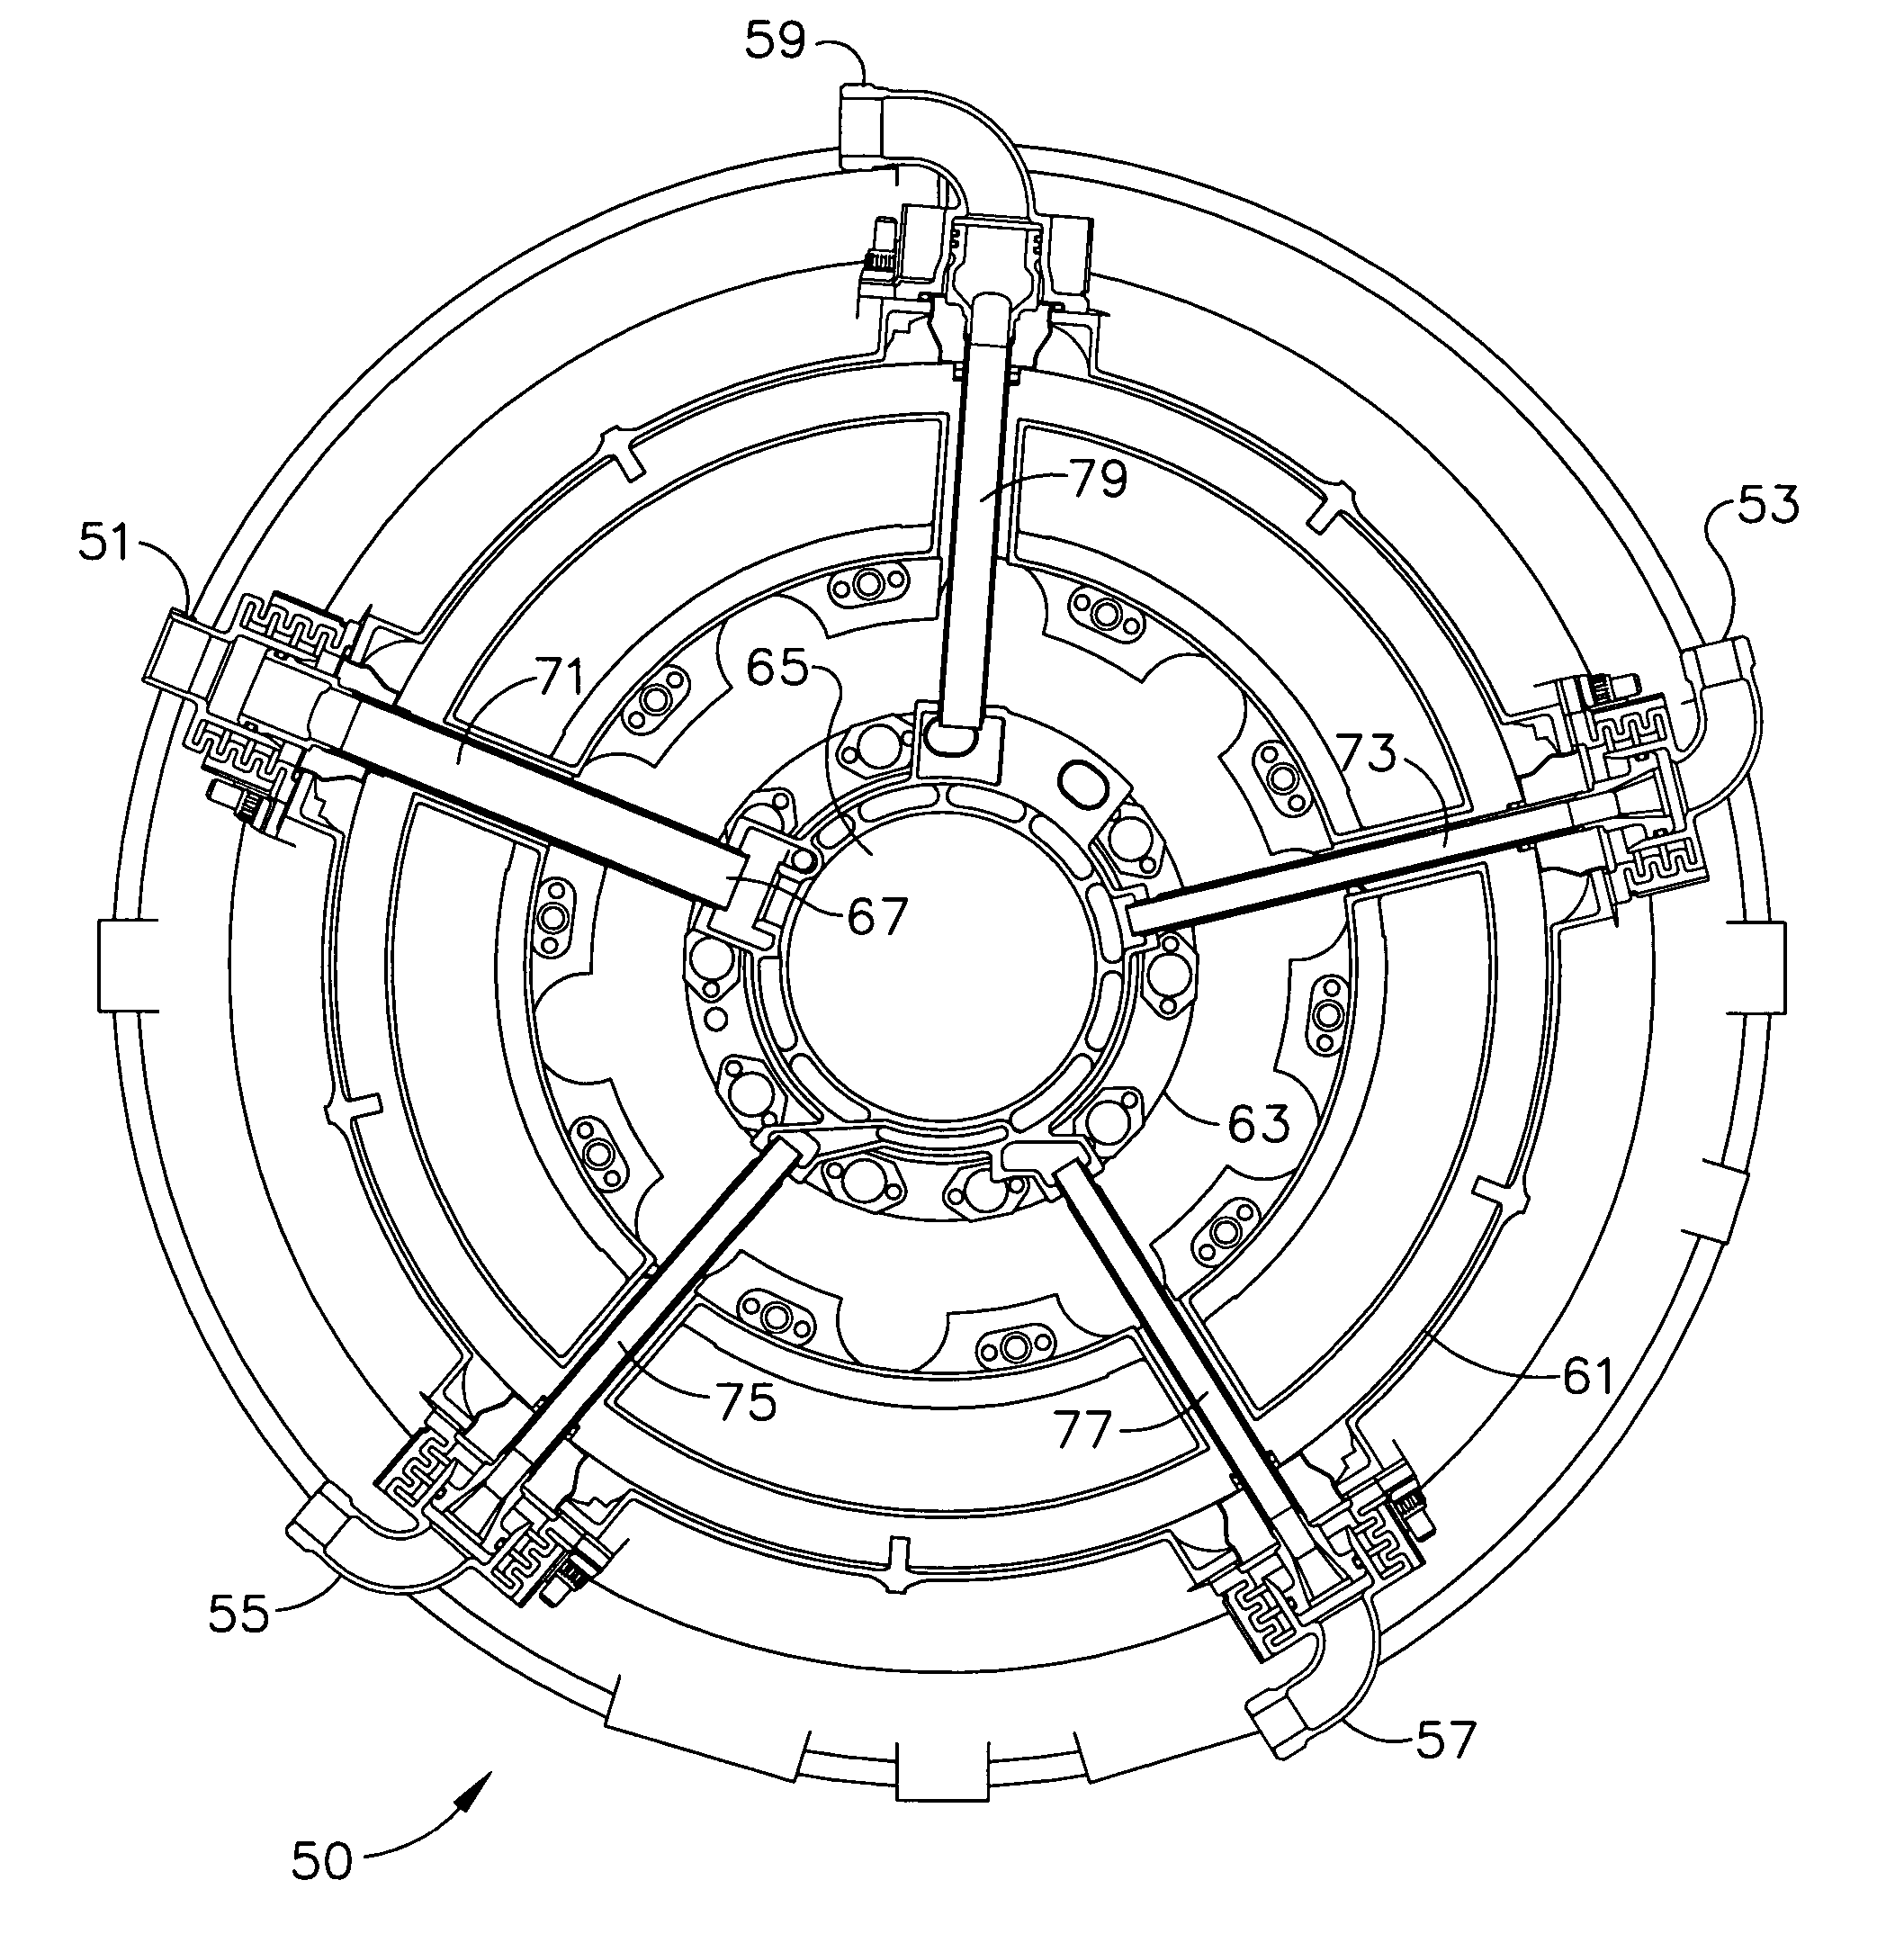 Apparatus and method for bearing lubrication in turbine engines